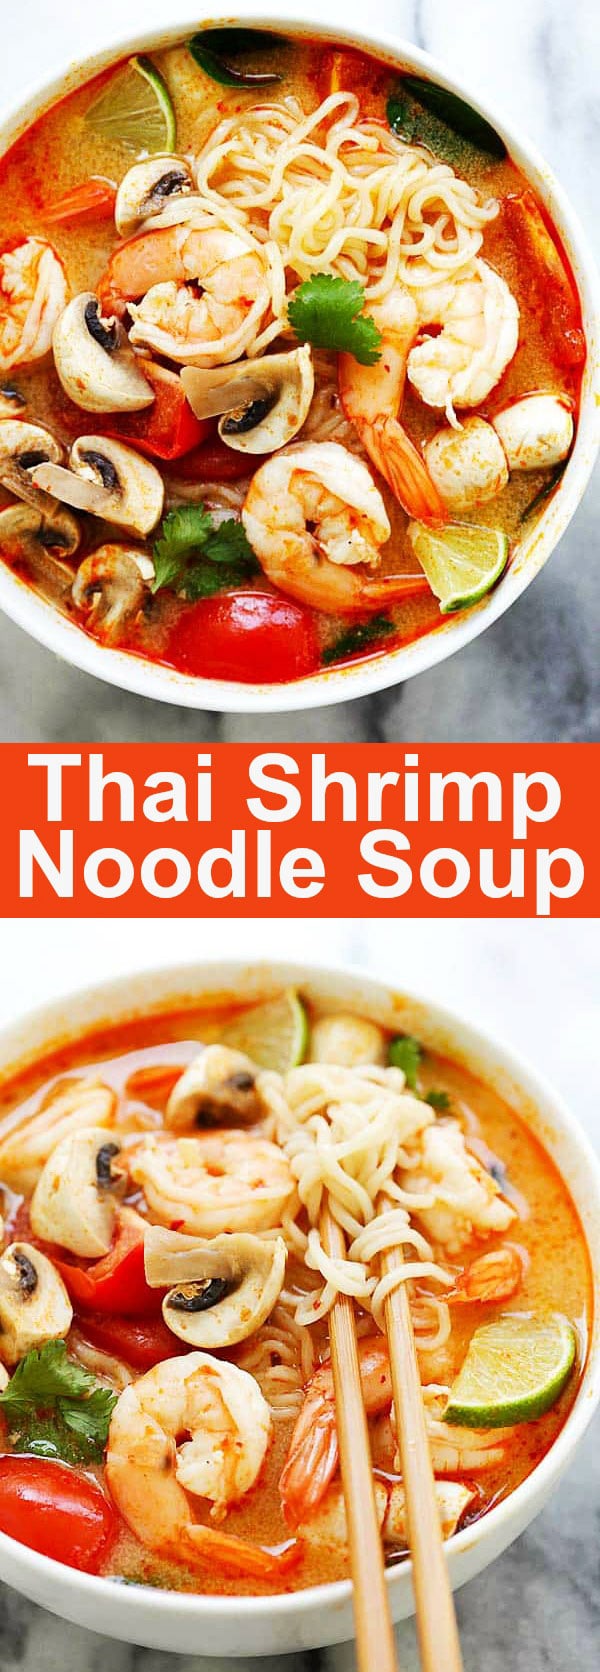 thai-shrimp-noodle-soup – quick and easy Thai shrimp noodle soup made with instant ramen noodles. Loaded with shrimp, mushrooms, herbs, tomatoes and mouthwatering Thai Tom Yum soup. So good! | rasamalaysia.com